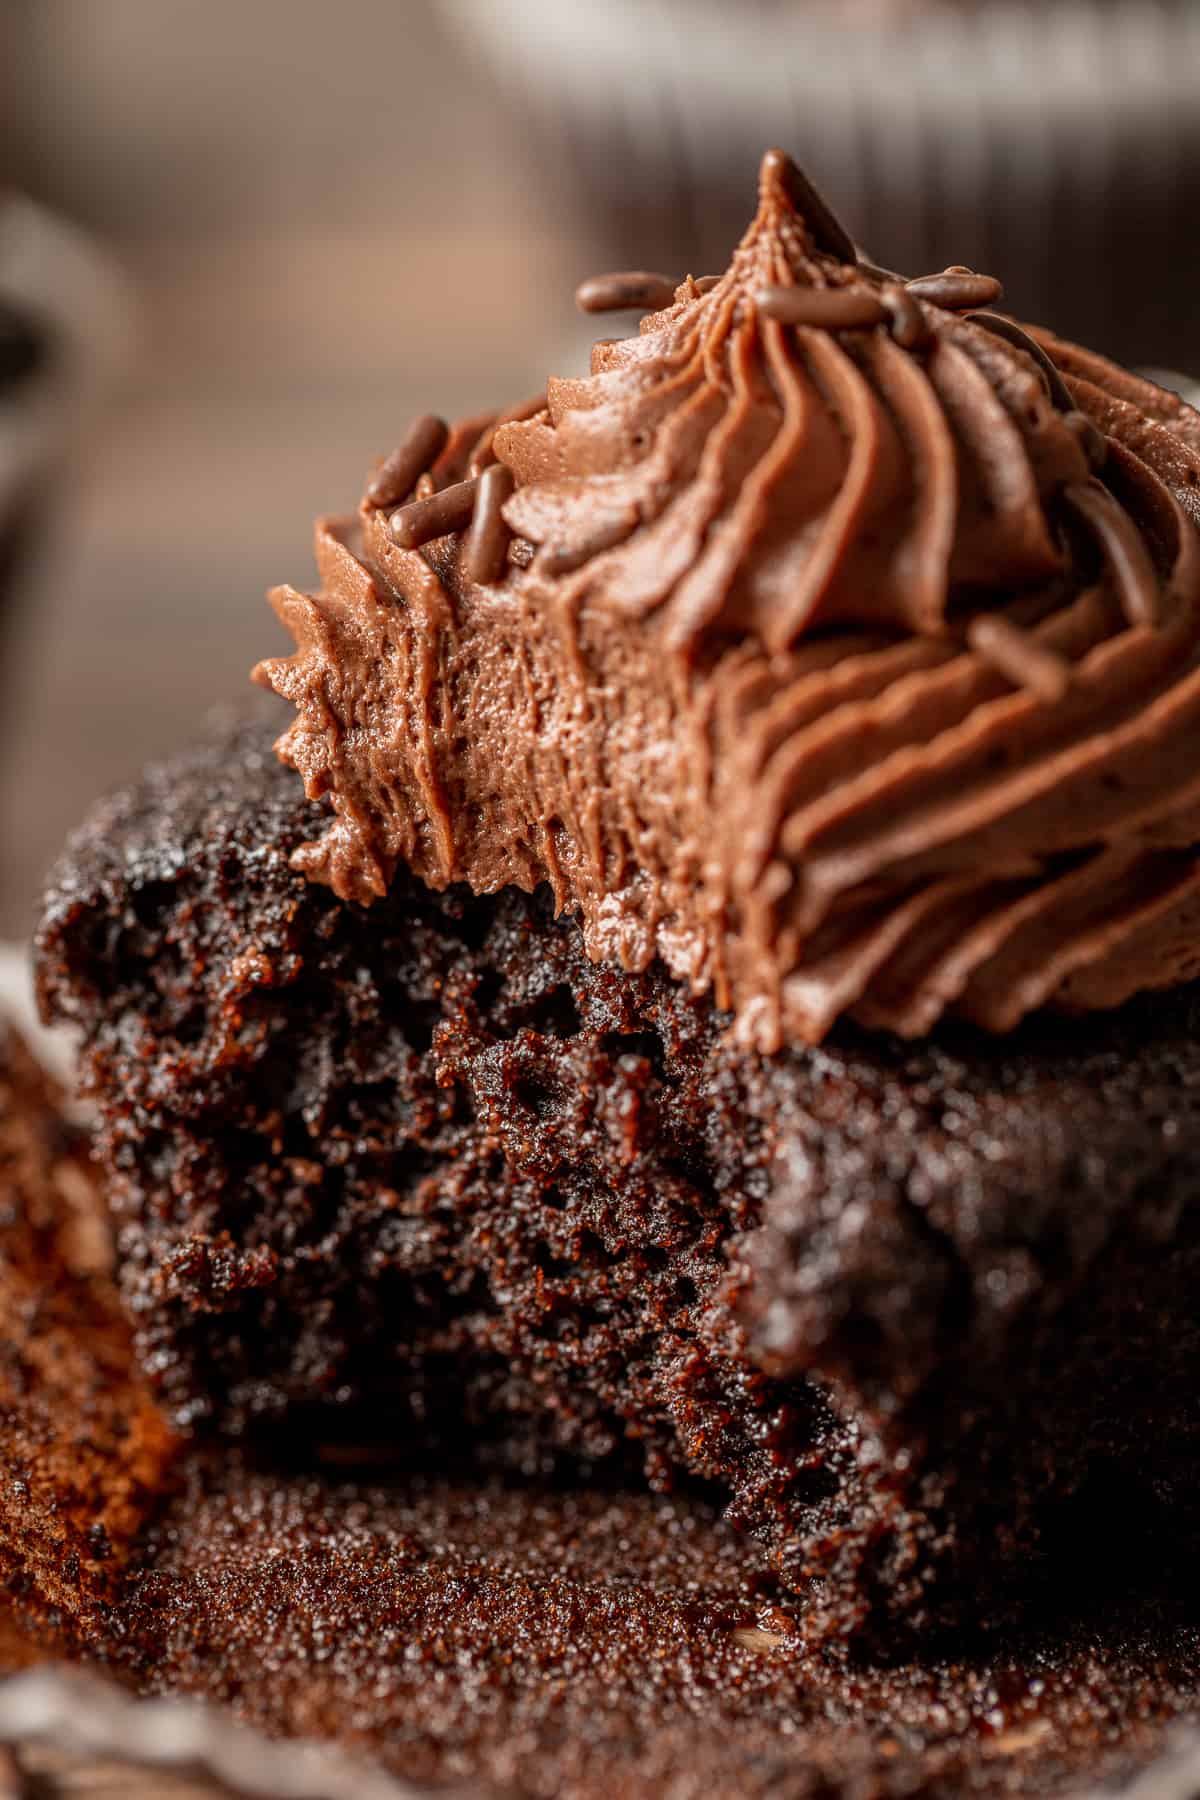 A close up shot of a bite taken out of a chocolate cupcake with chocolate buttercream.